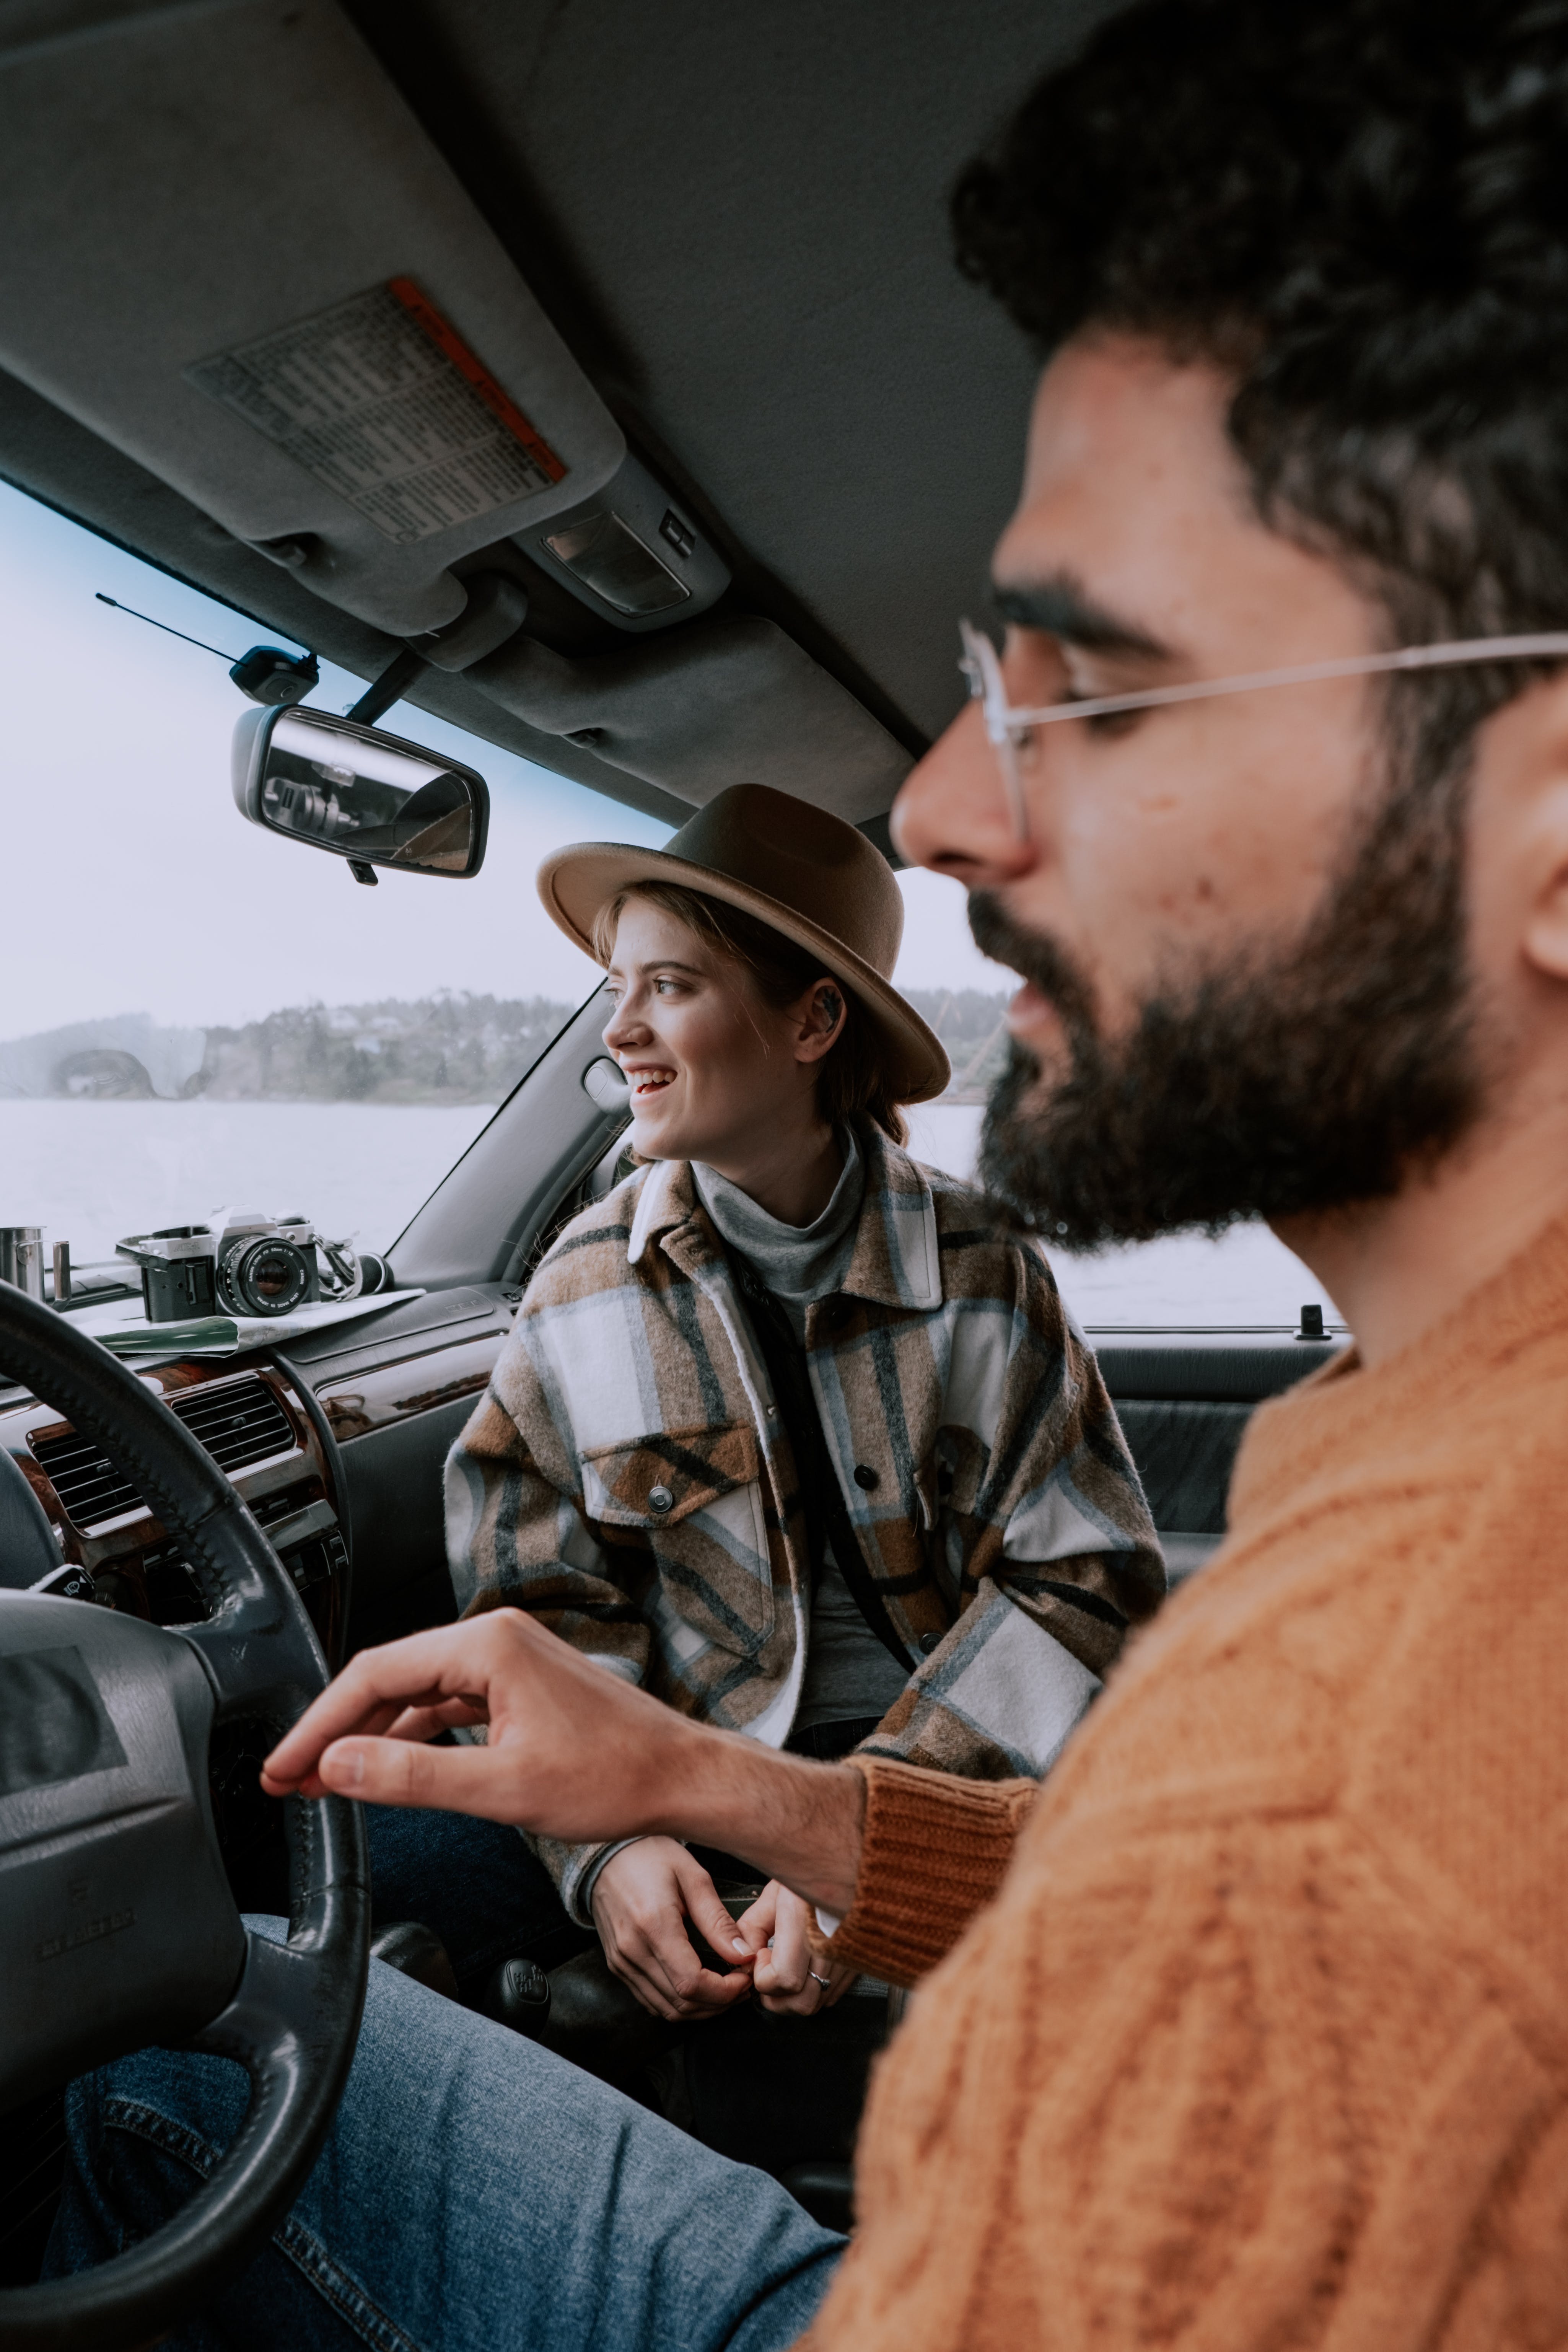 A young couple driving together with the woman sitting in the passenger seat | Source: Pexels